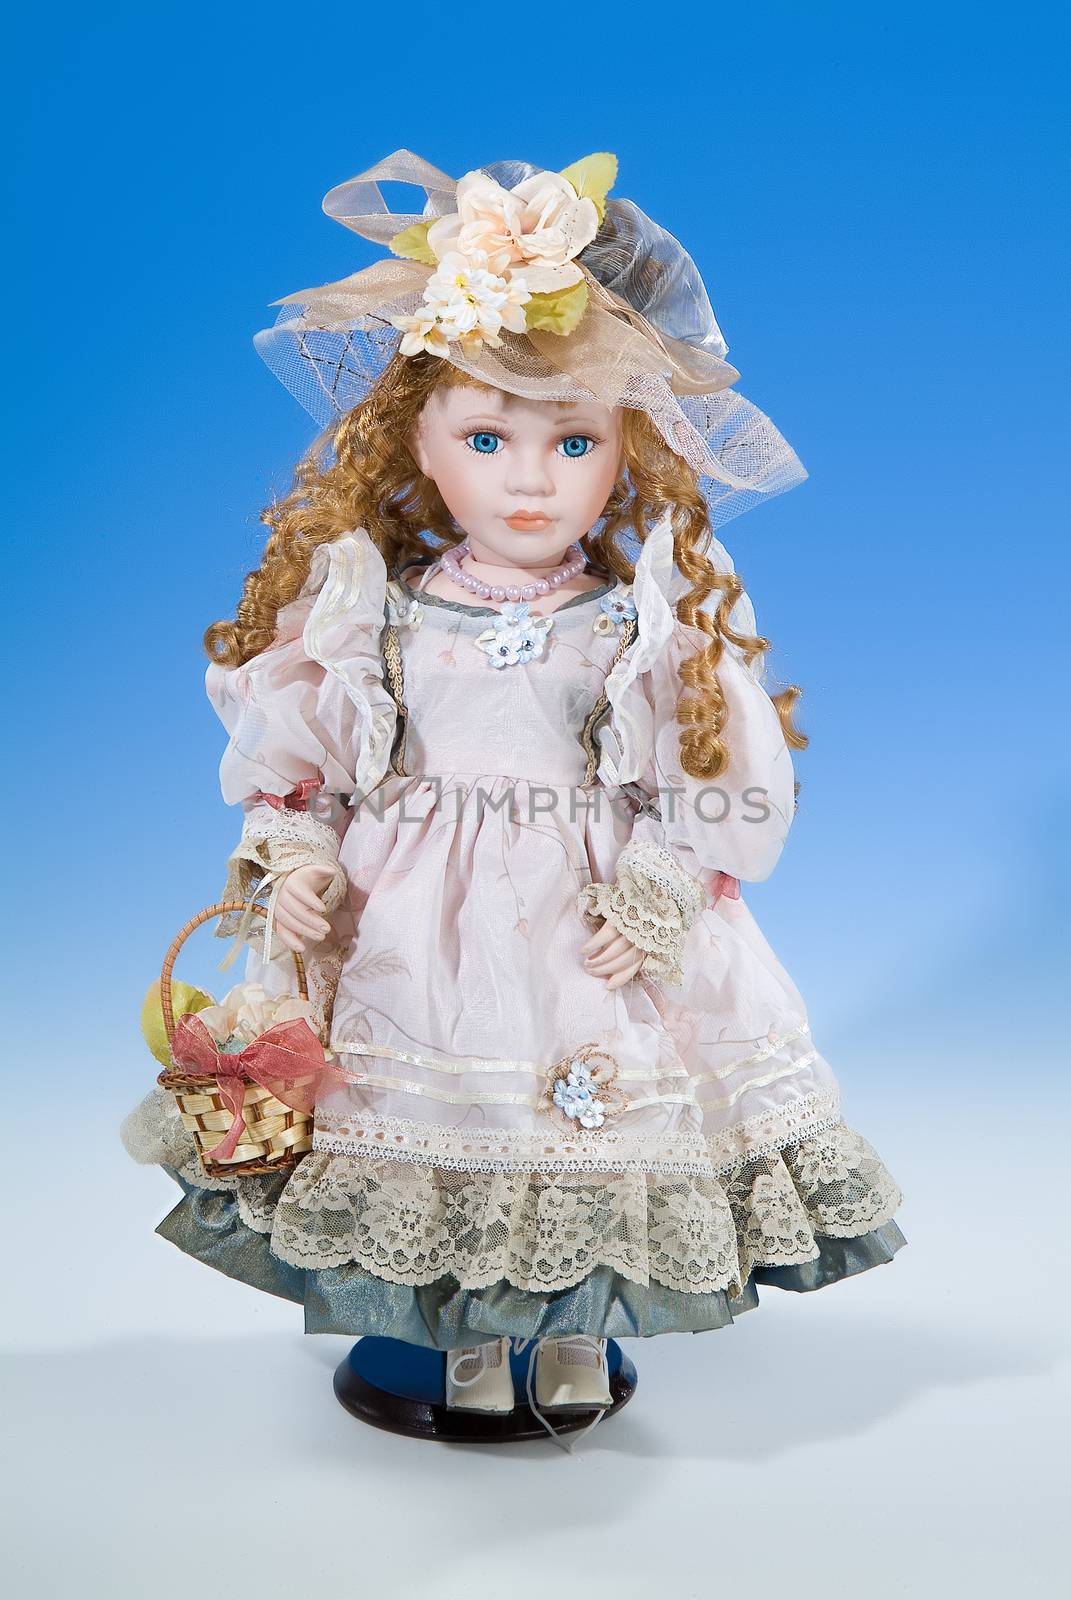 The big doll on a blue and white background